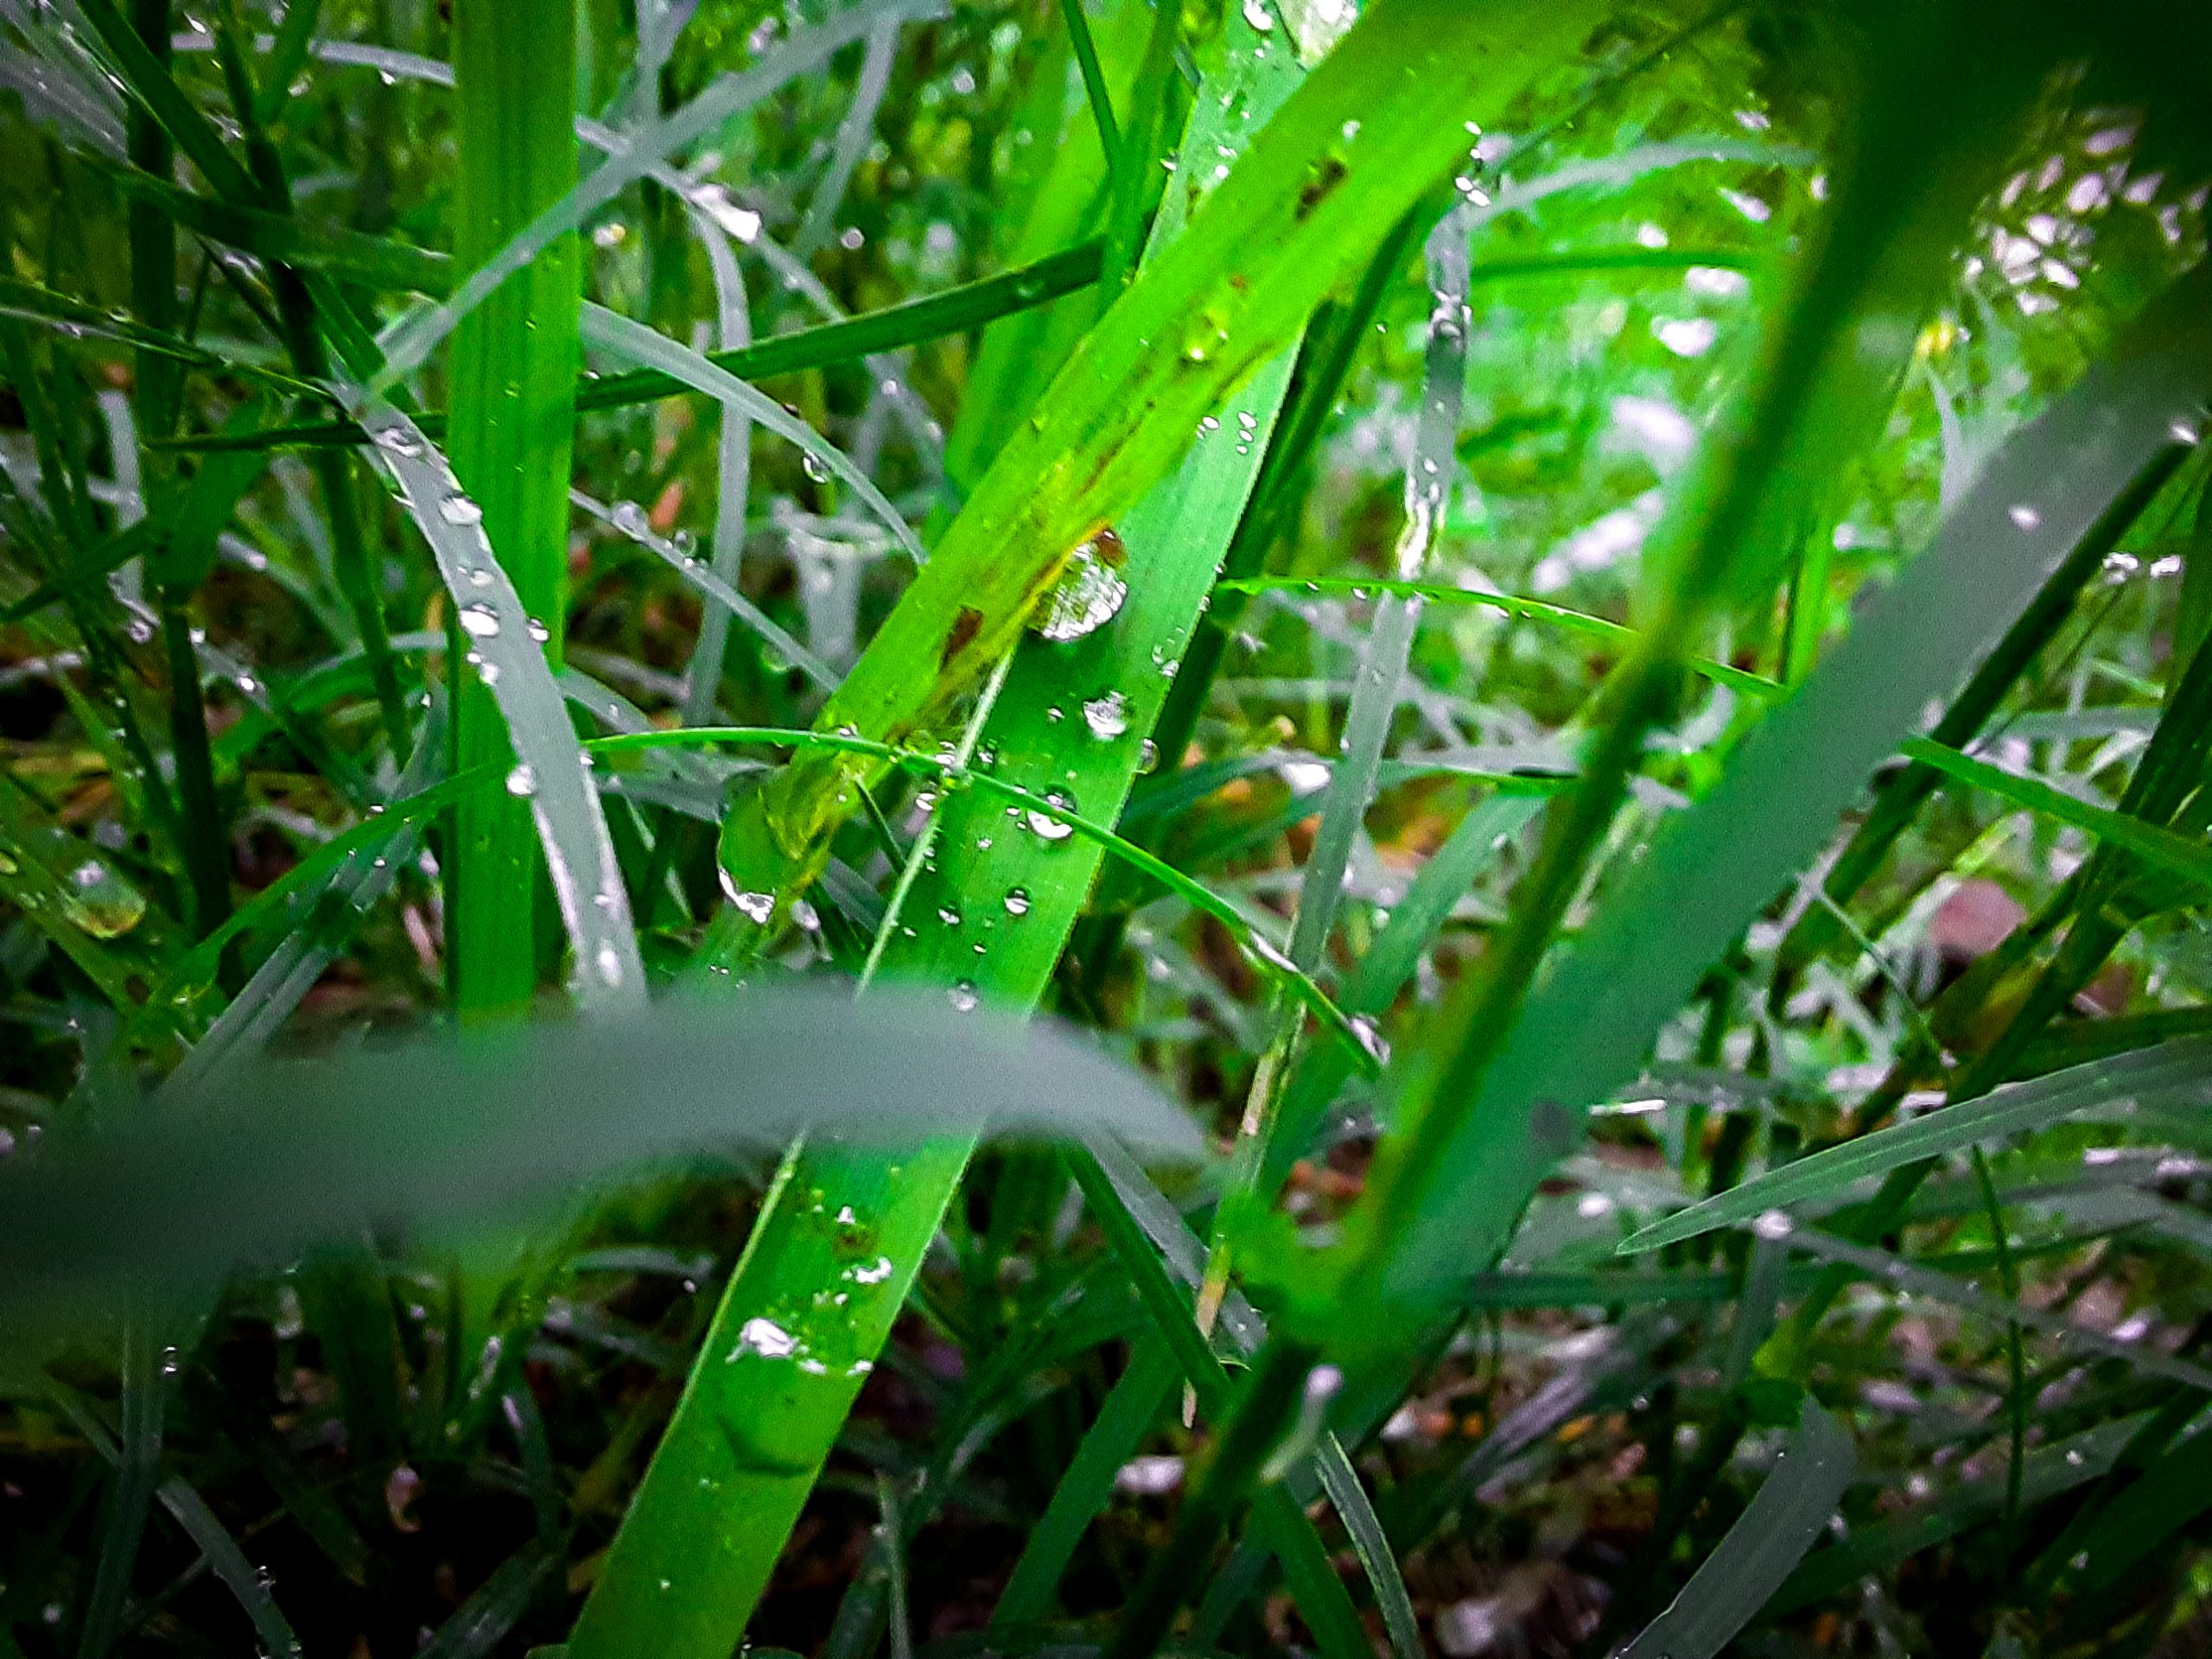 Rainy grass with water drops